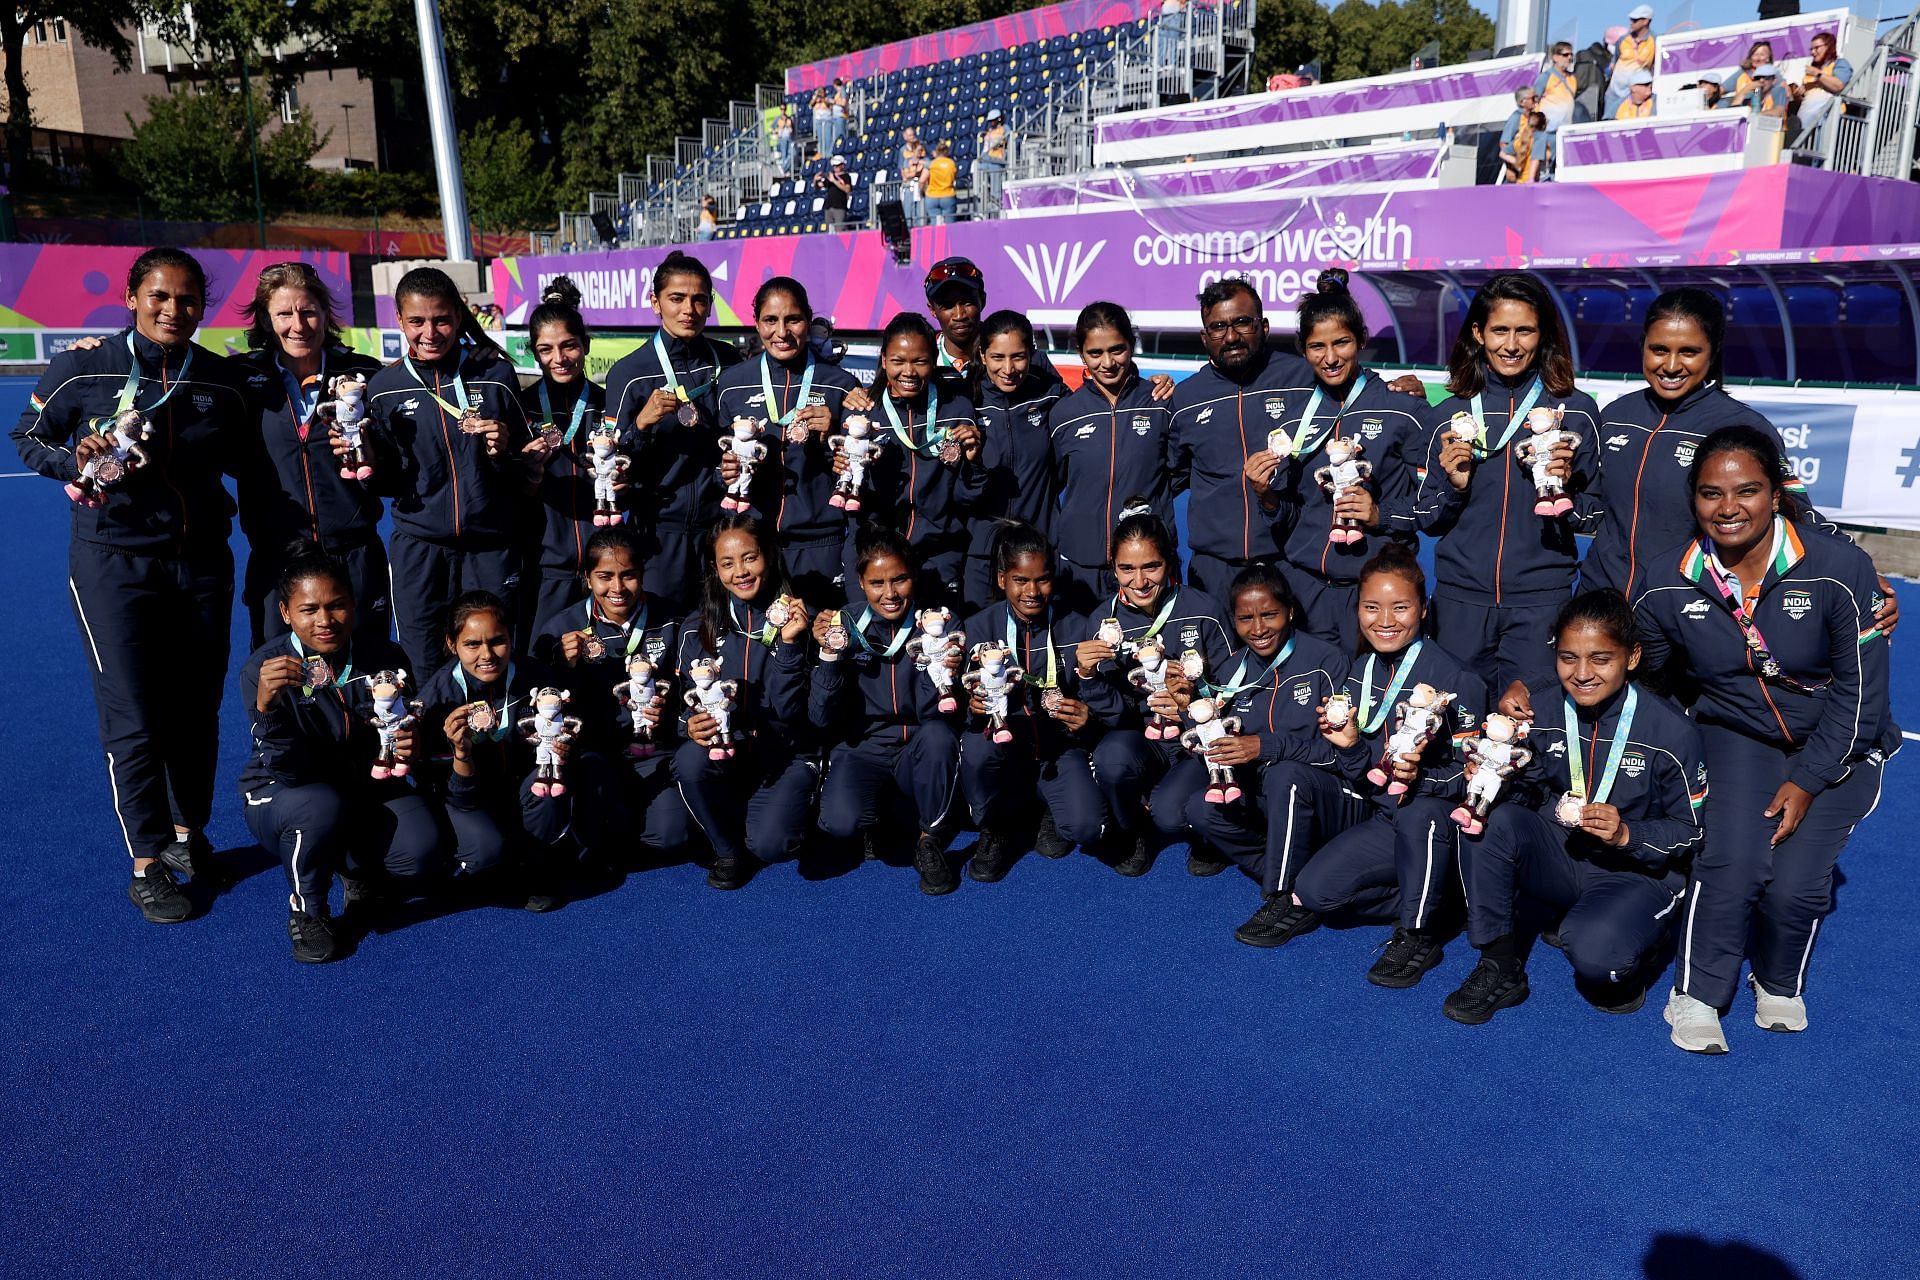 The Indians won a historic bronze at the Commonwealth Games